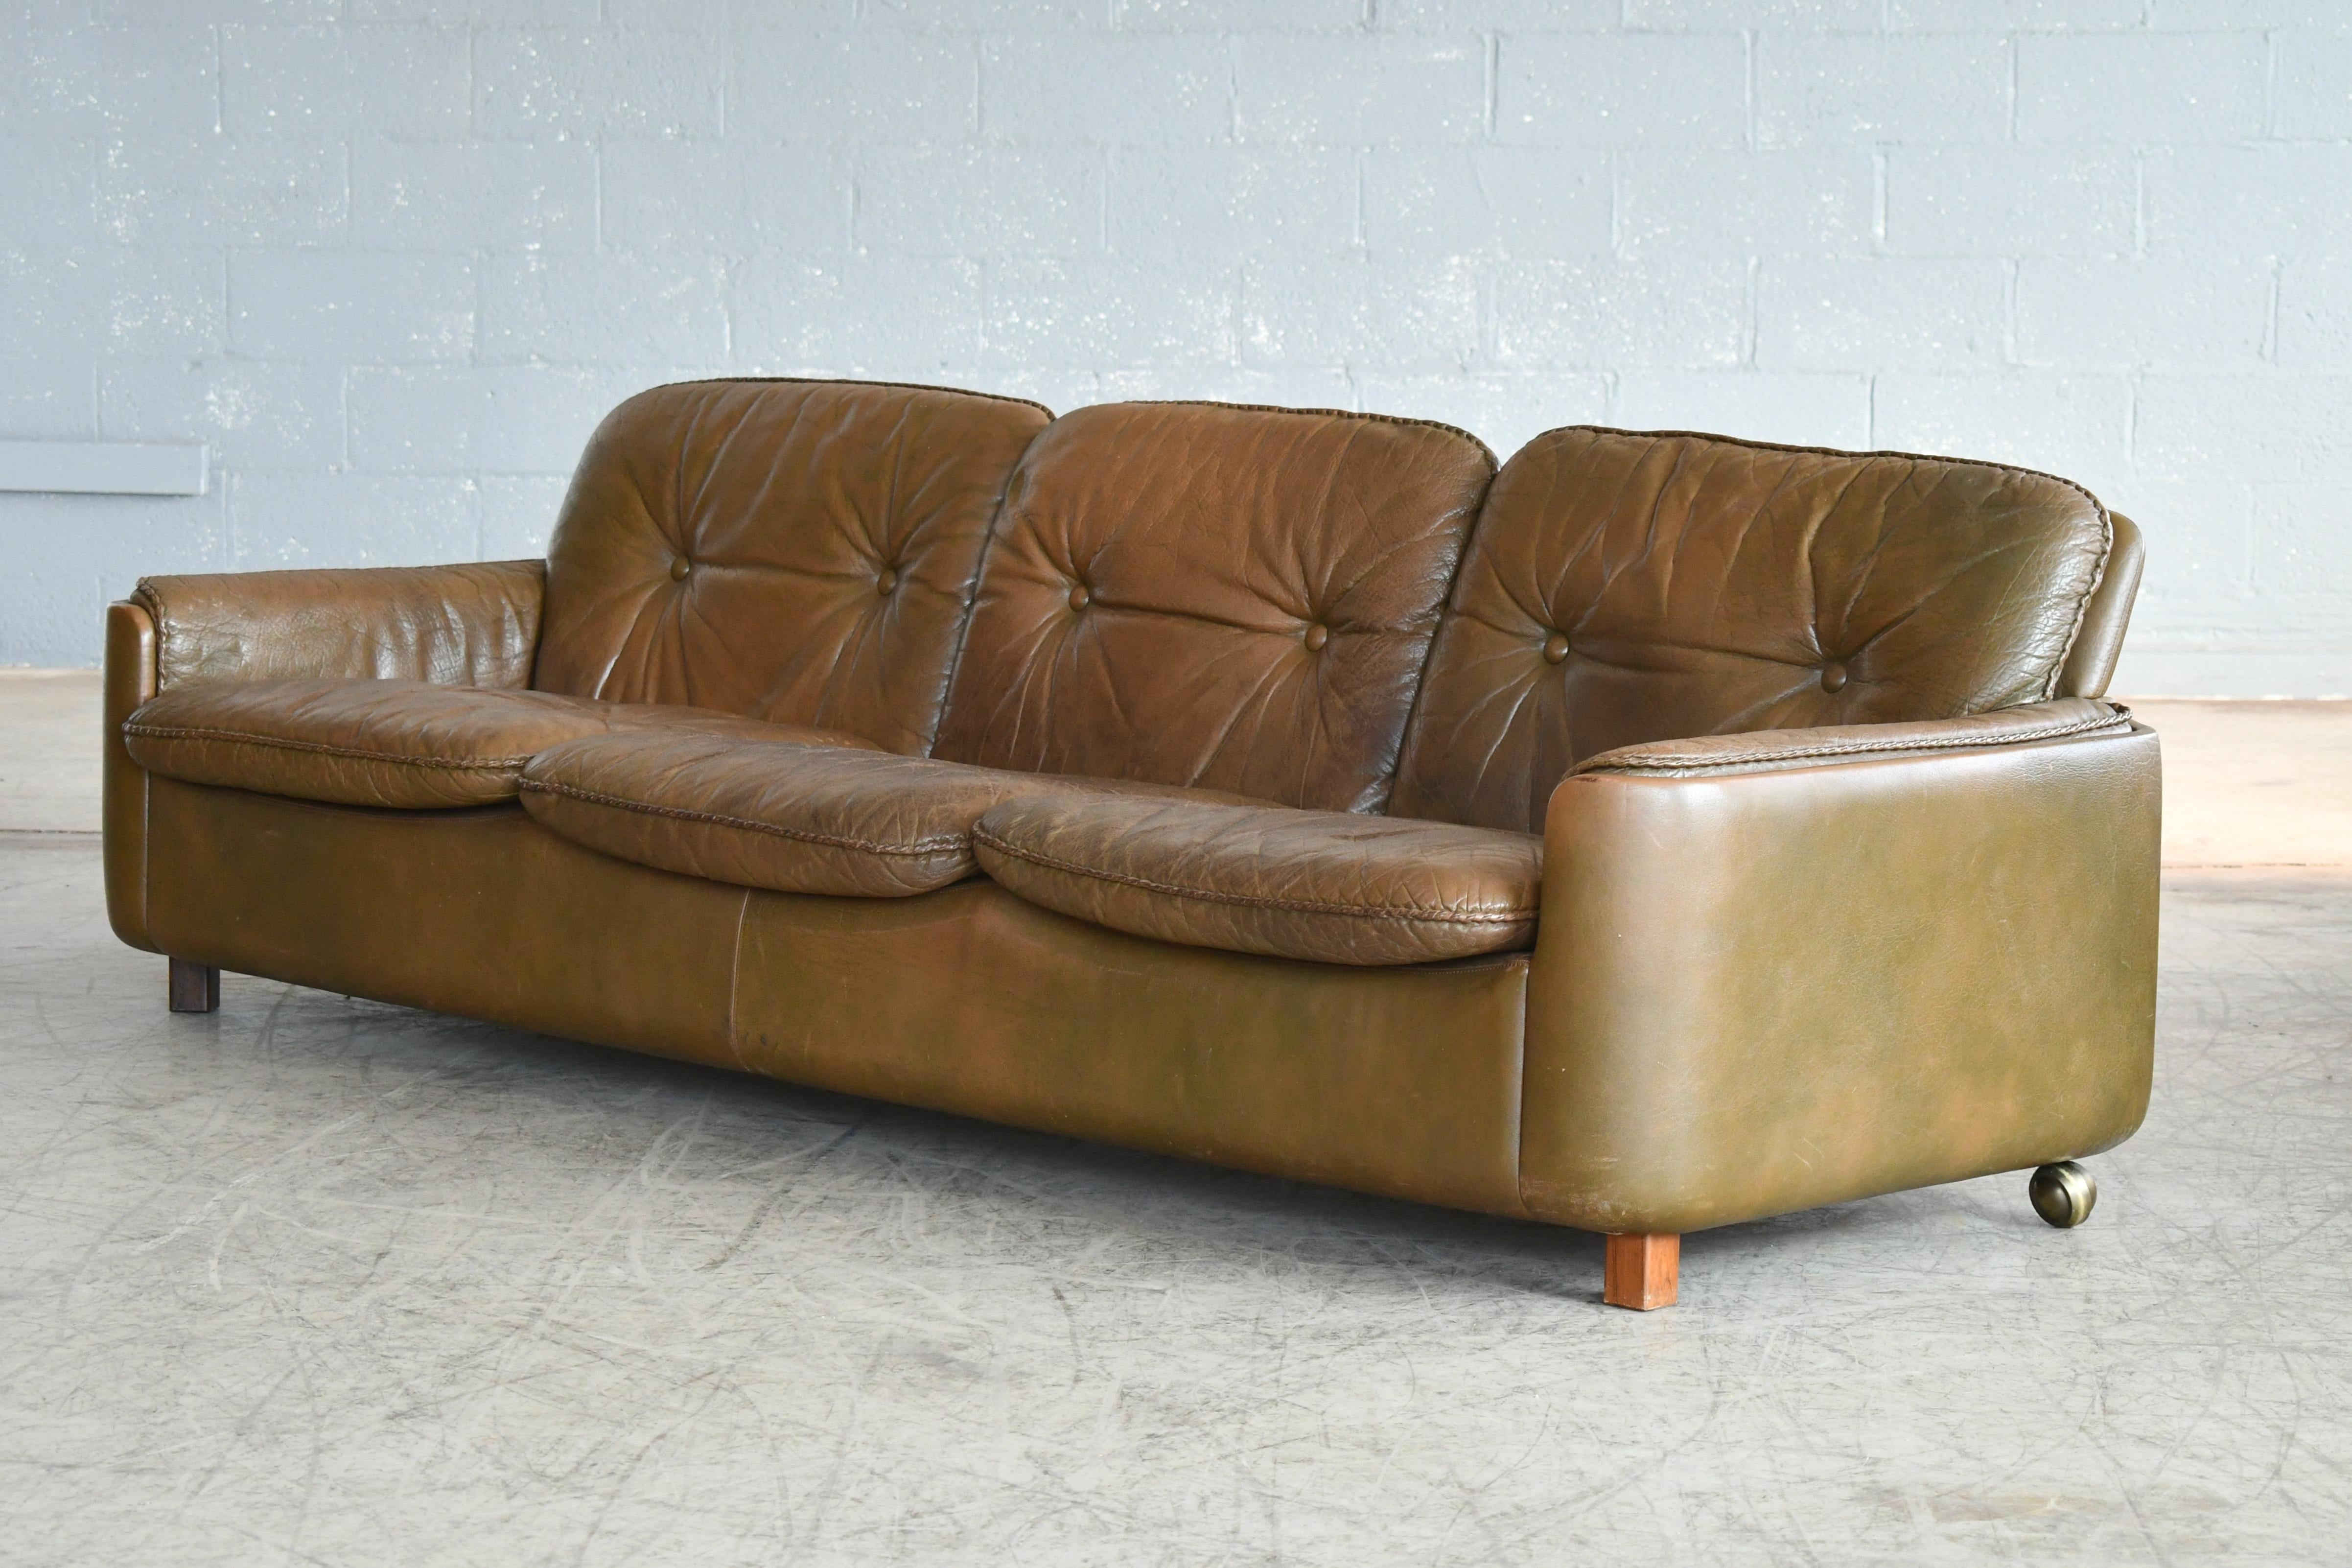 Scandinavian Modern 3-Seat Sofa in Buffalo Leather by Sigurd Ressell for Vatne 3